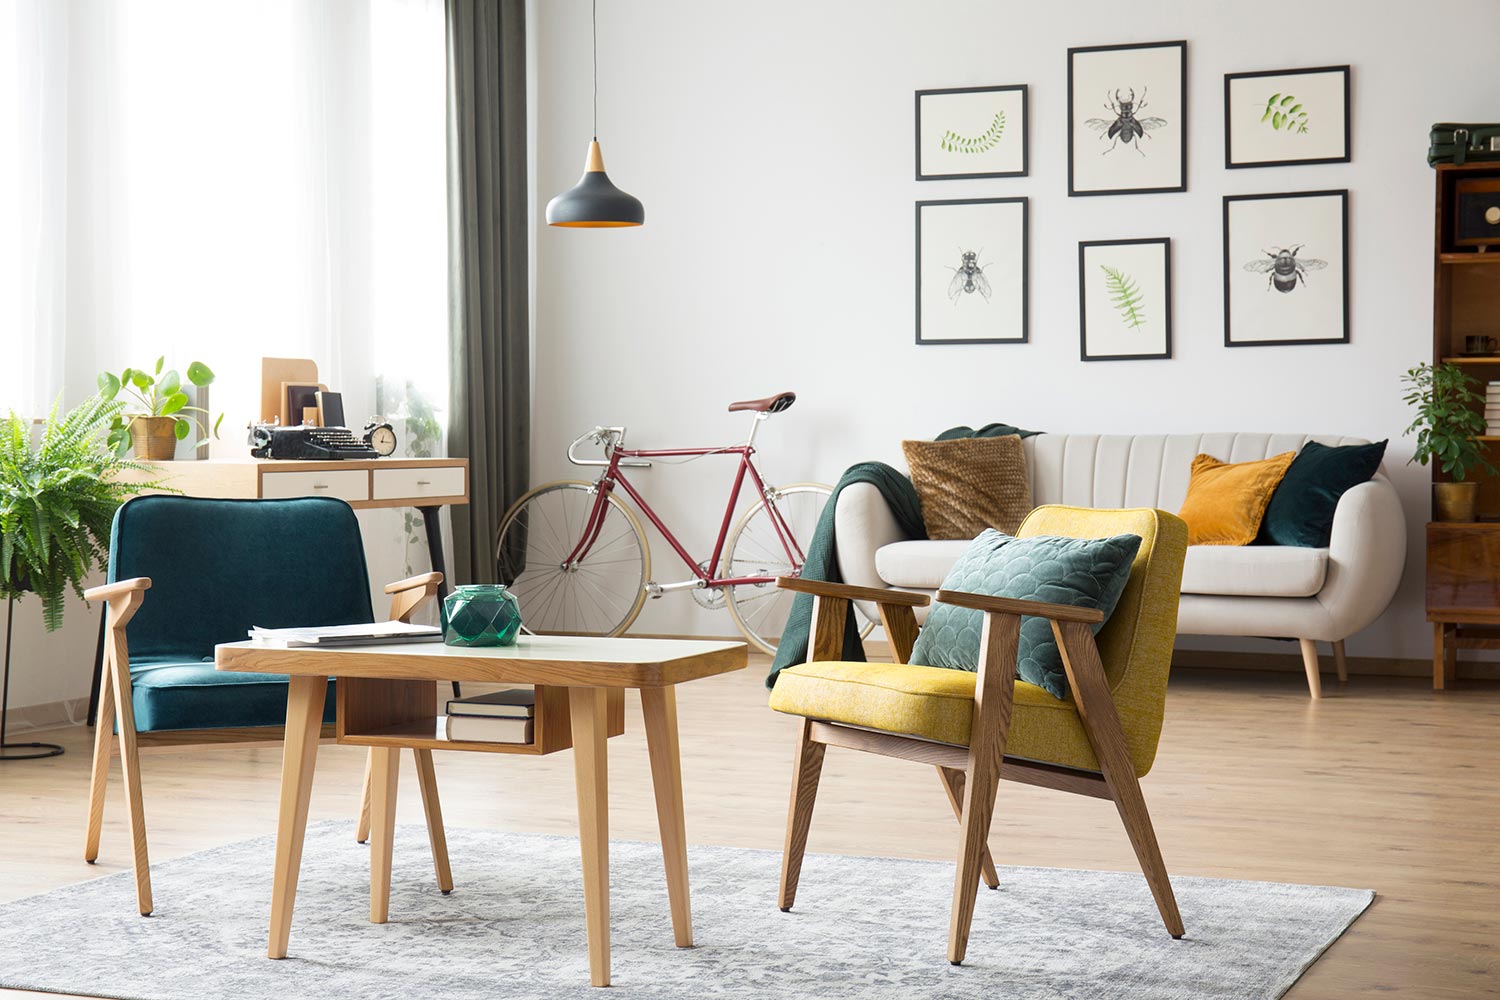 Retro armchairs at wooden table on grey carpet in living room with lamp, bike and posters